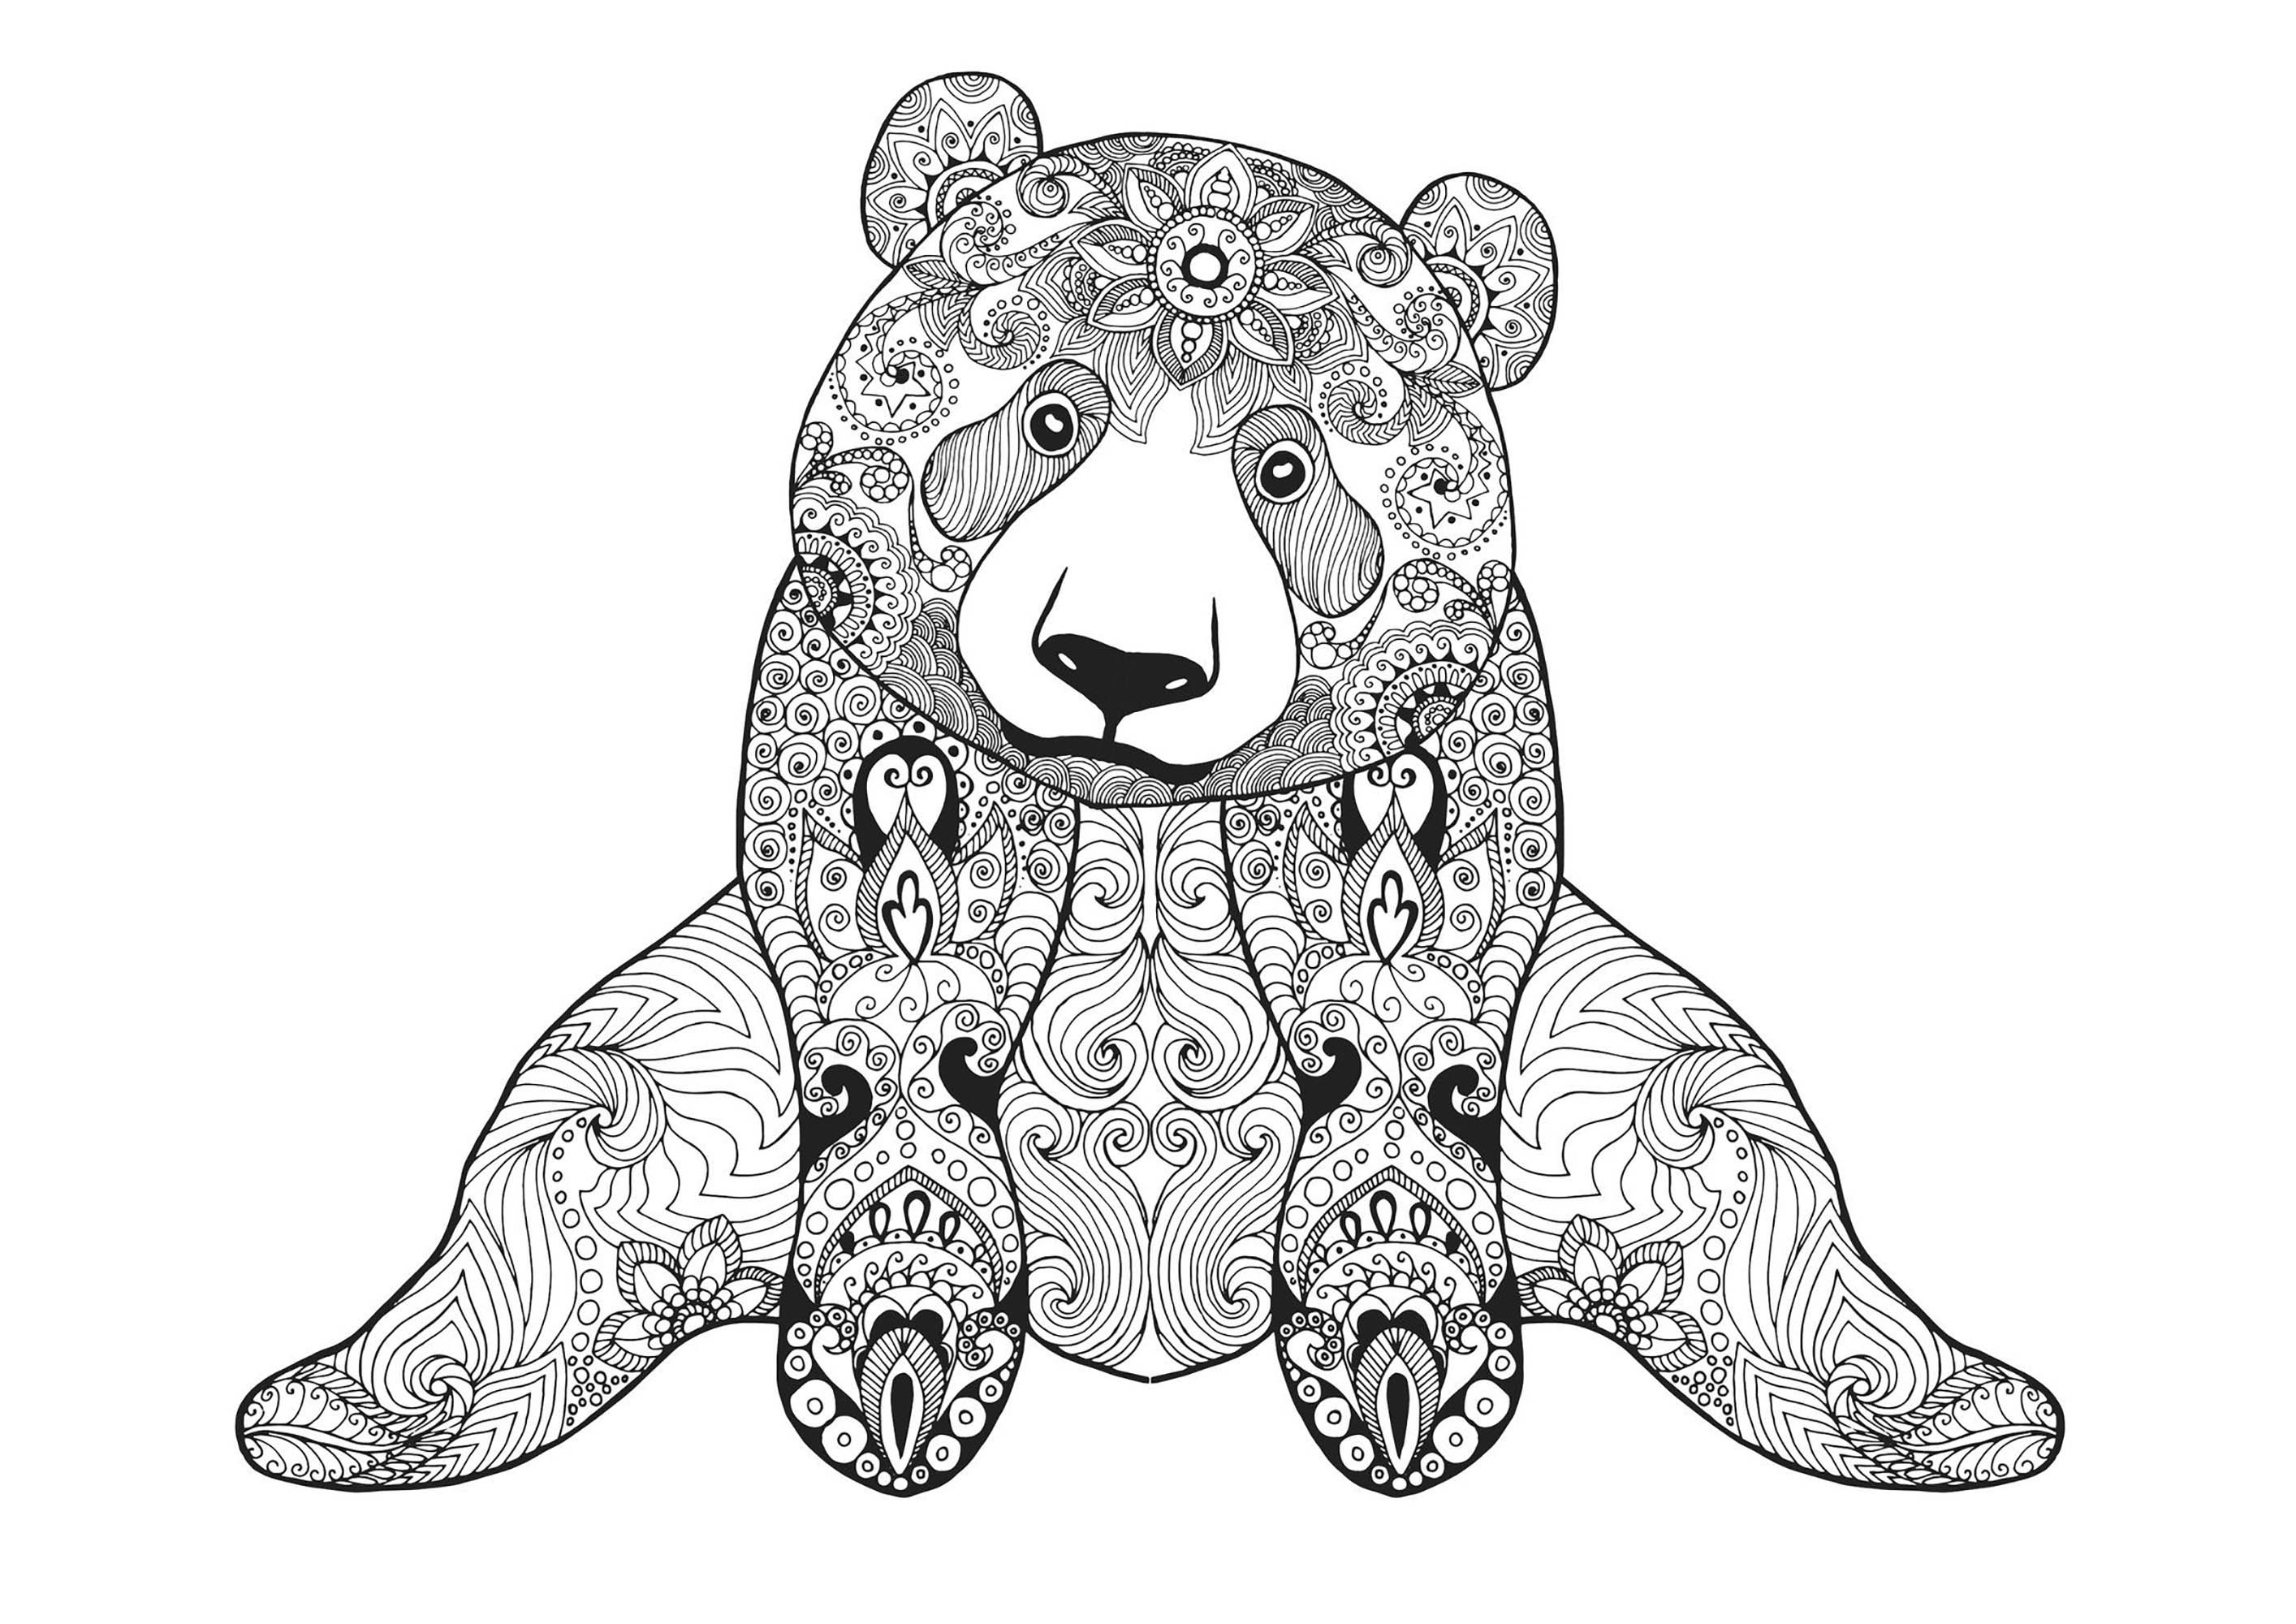 Download Sitting bear - Bears Adult Coloring Pages